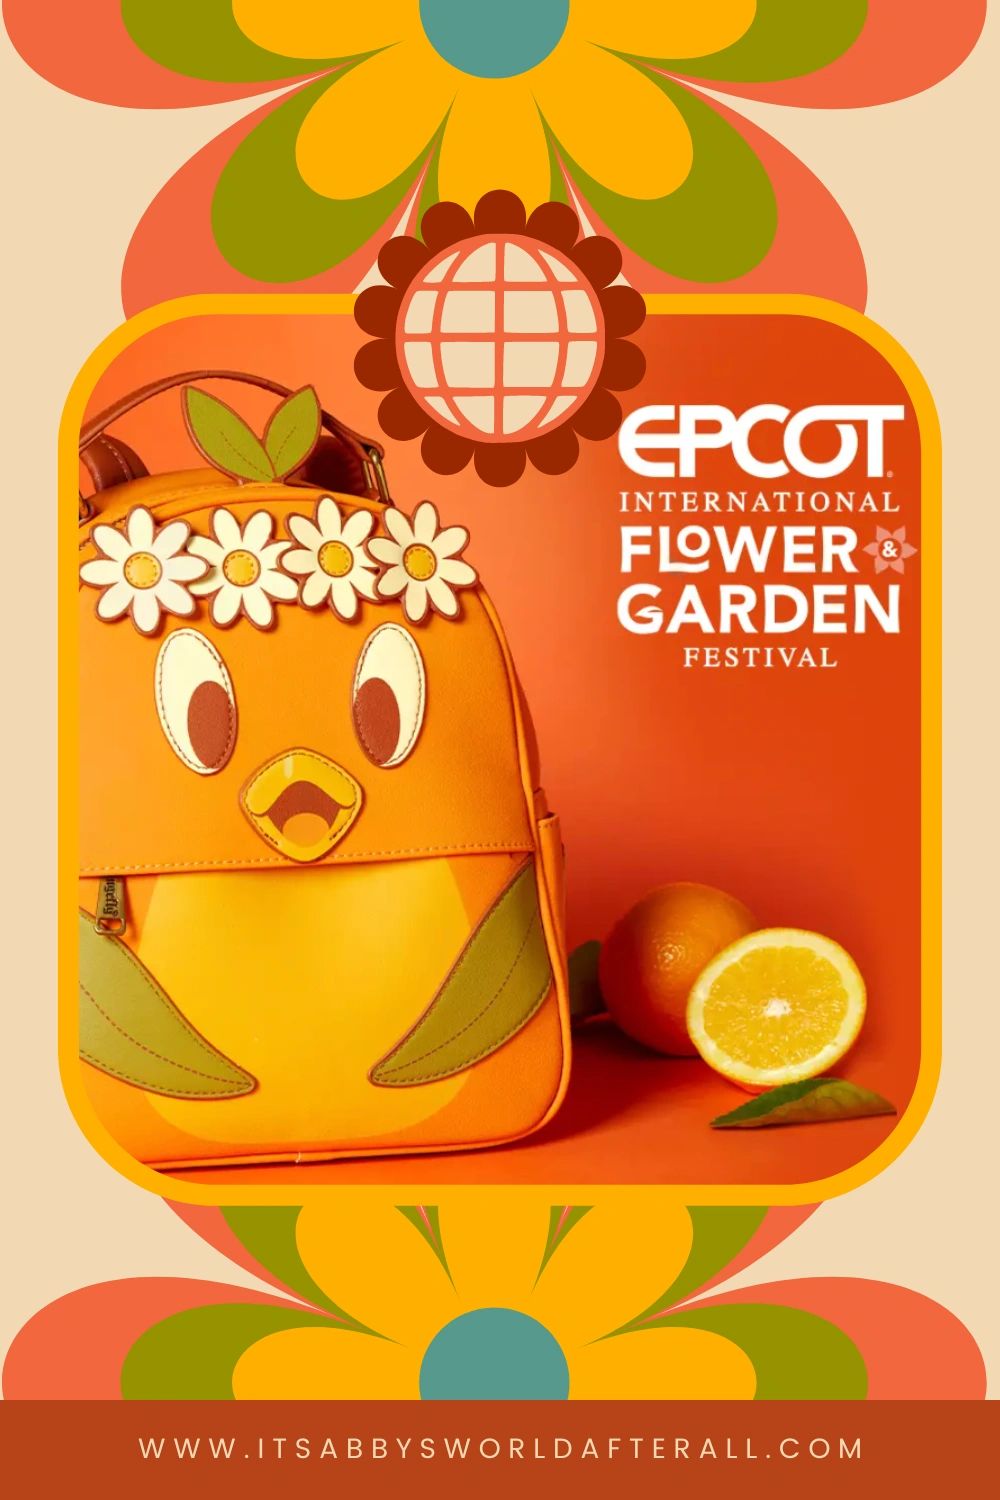 The EPCOT Collection - Flower and Garden Festival 2023